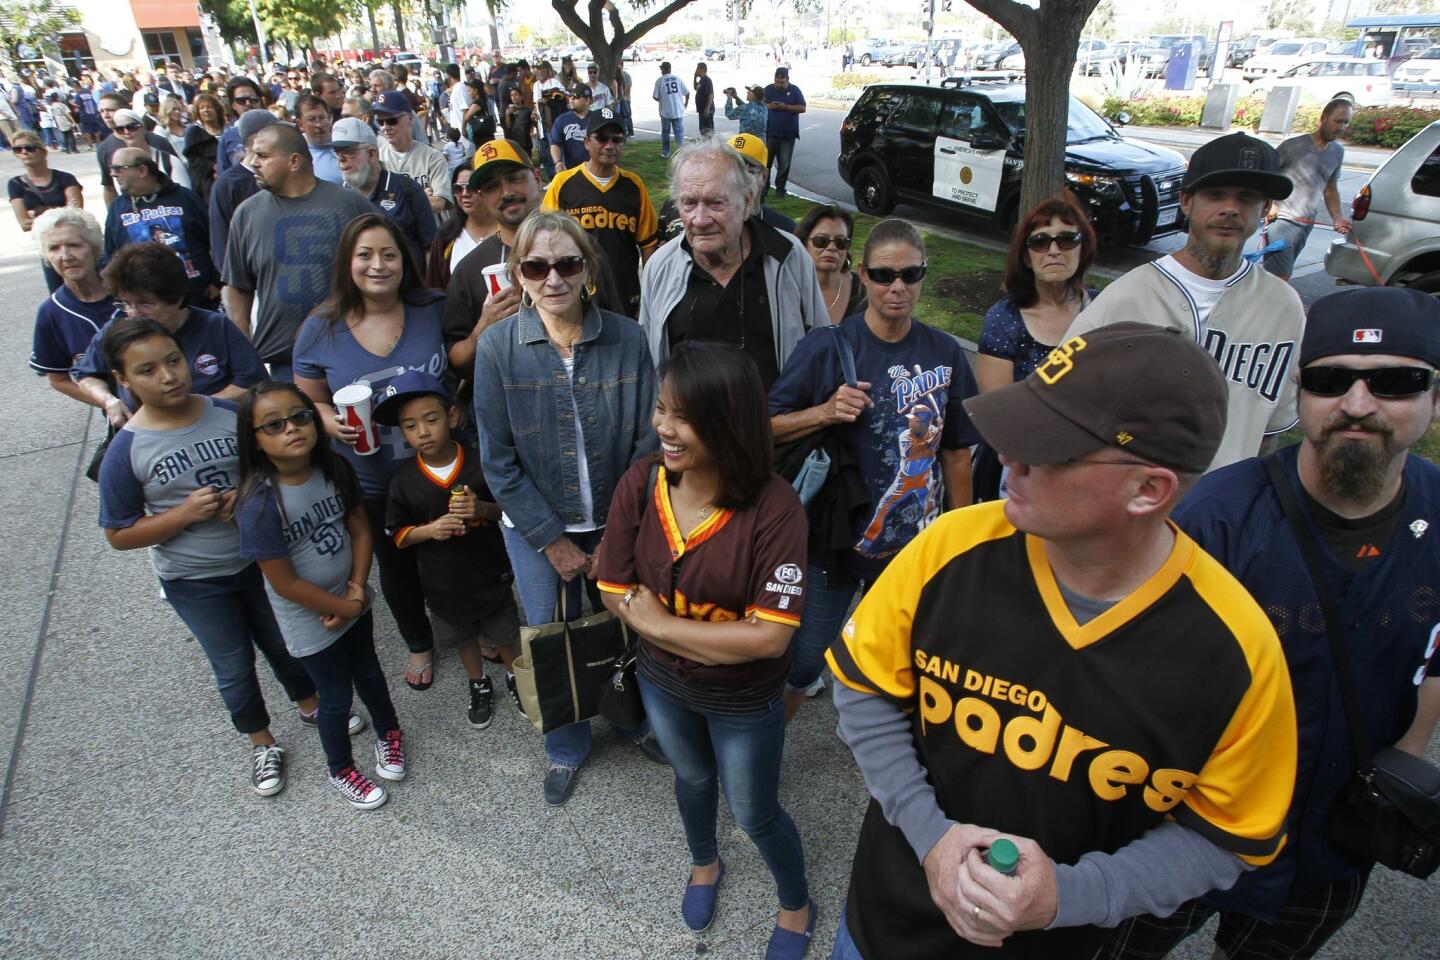 Amazing Grace' for Tony Gwynn: Petco Park Memorial Service - Times of San  Diego